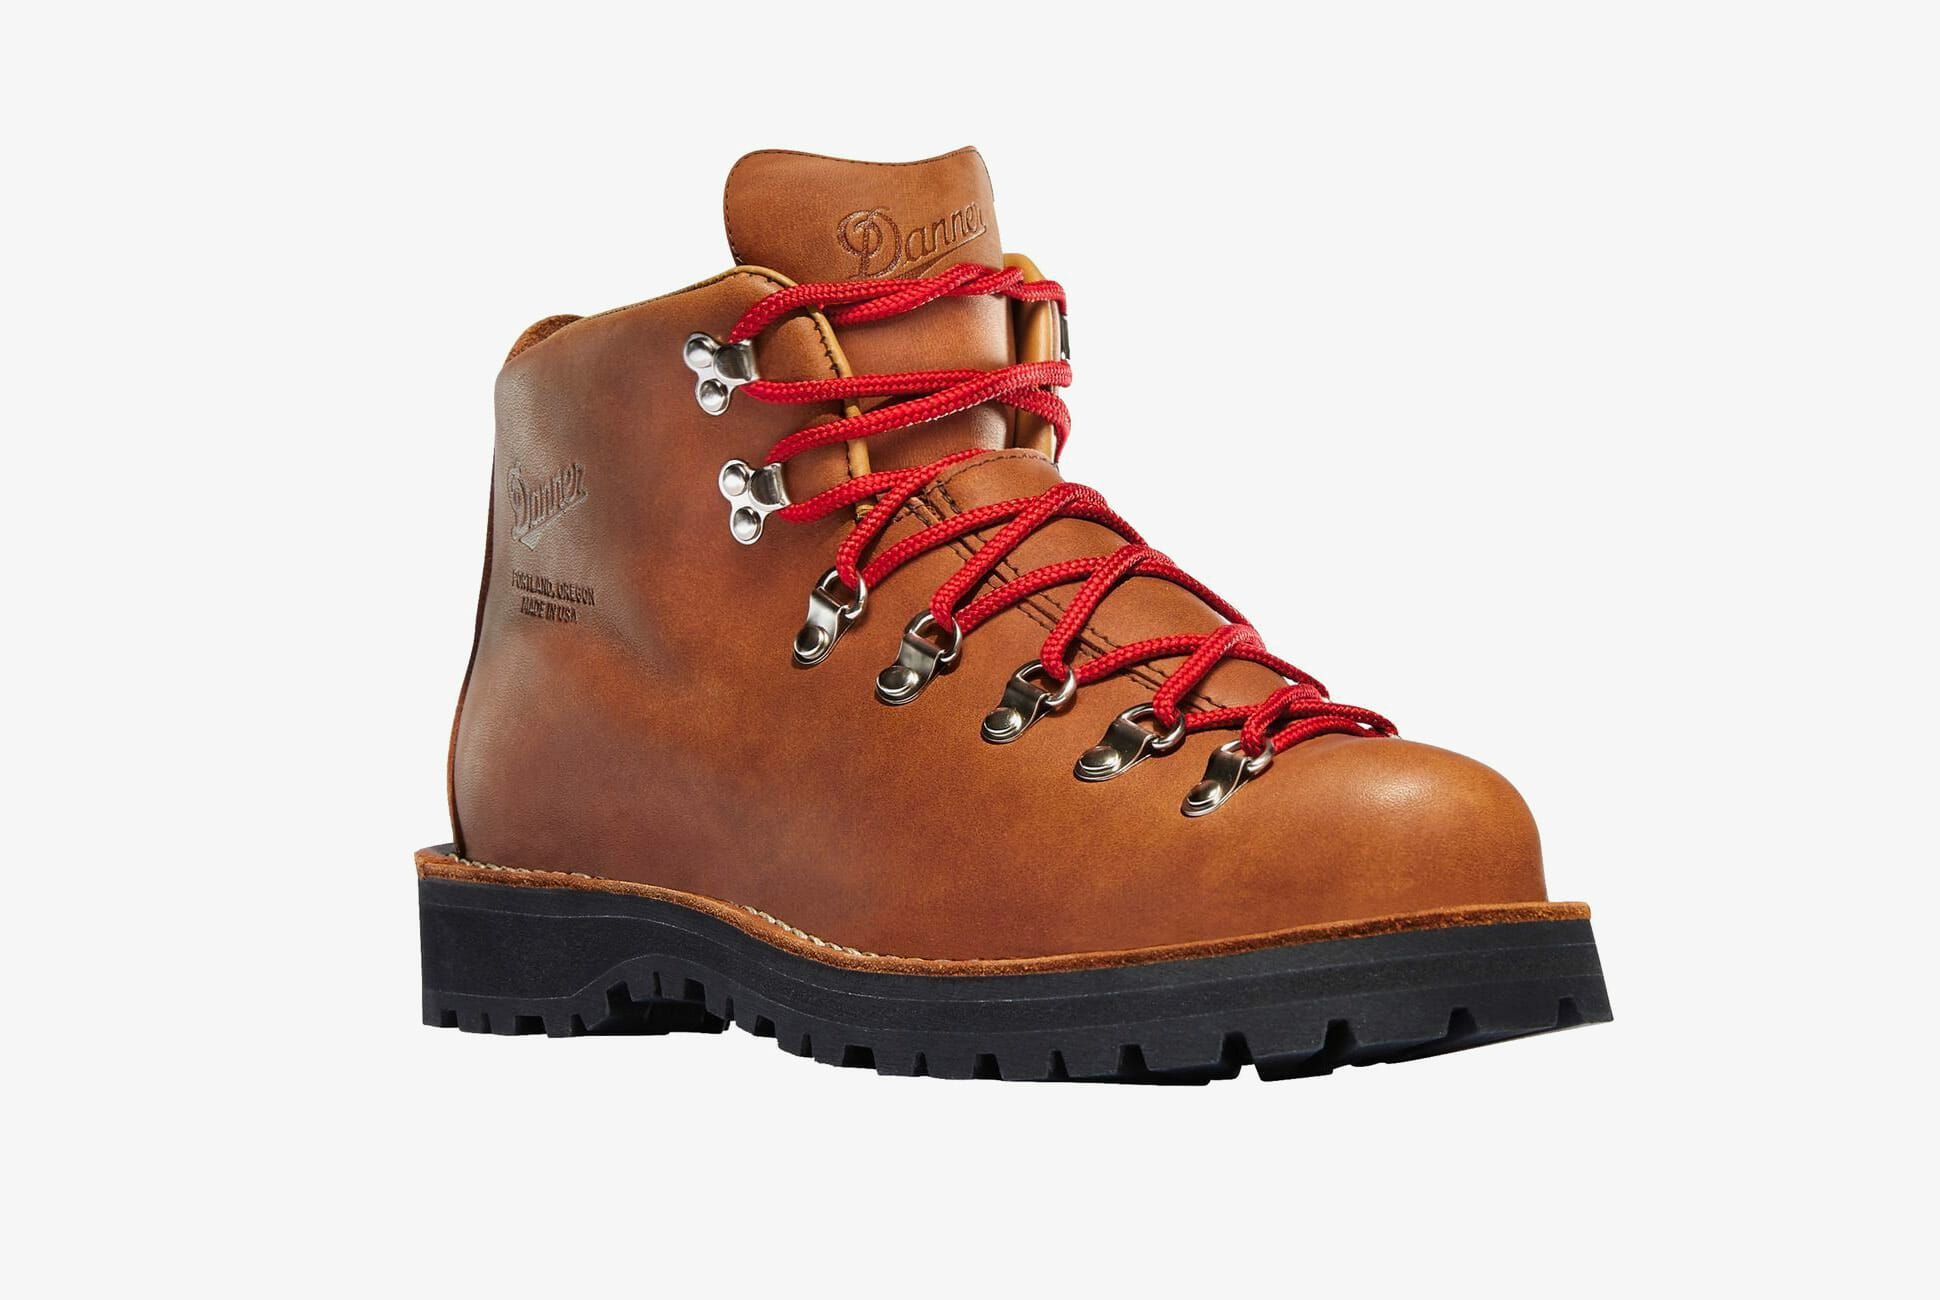 danner hiking boots sale